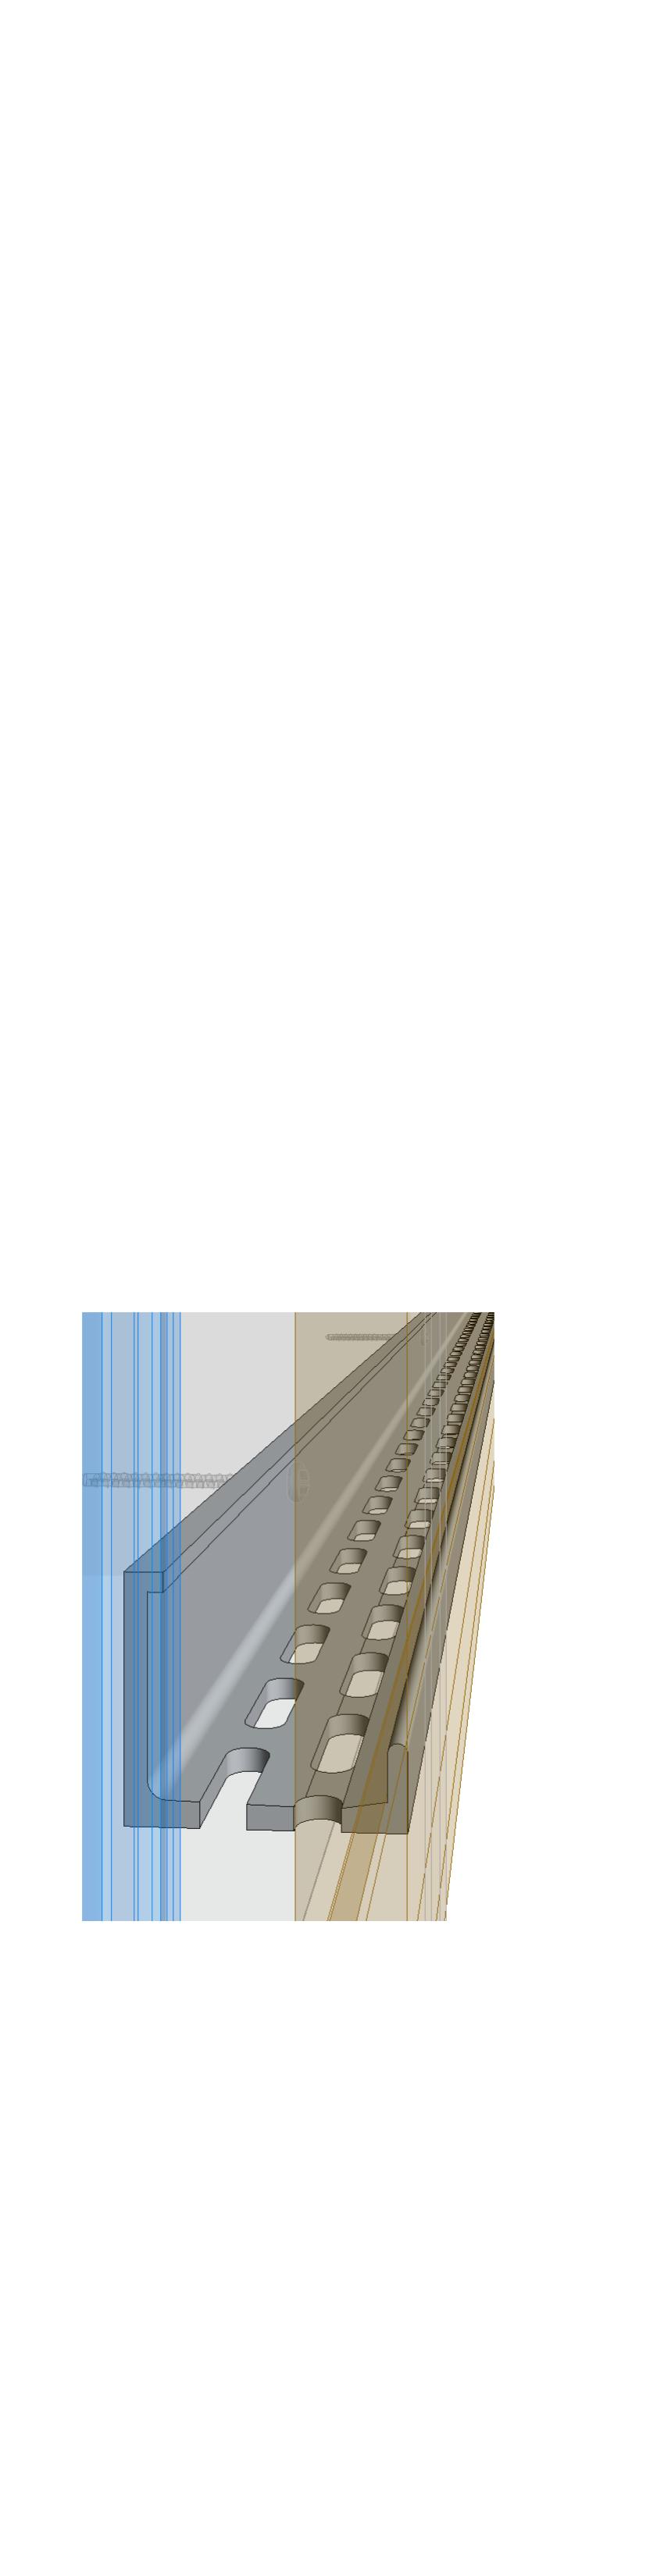 15/16" Structural Substrate Bottom Rail L 901 with Drainage Slot 3/4" x 3/16" Window Flashing 1 Section - K Window Surround per